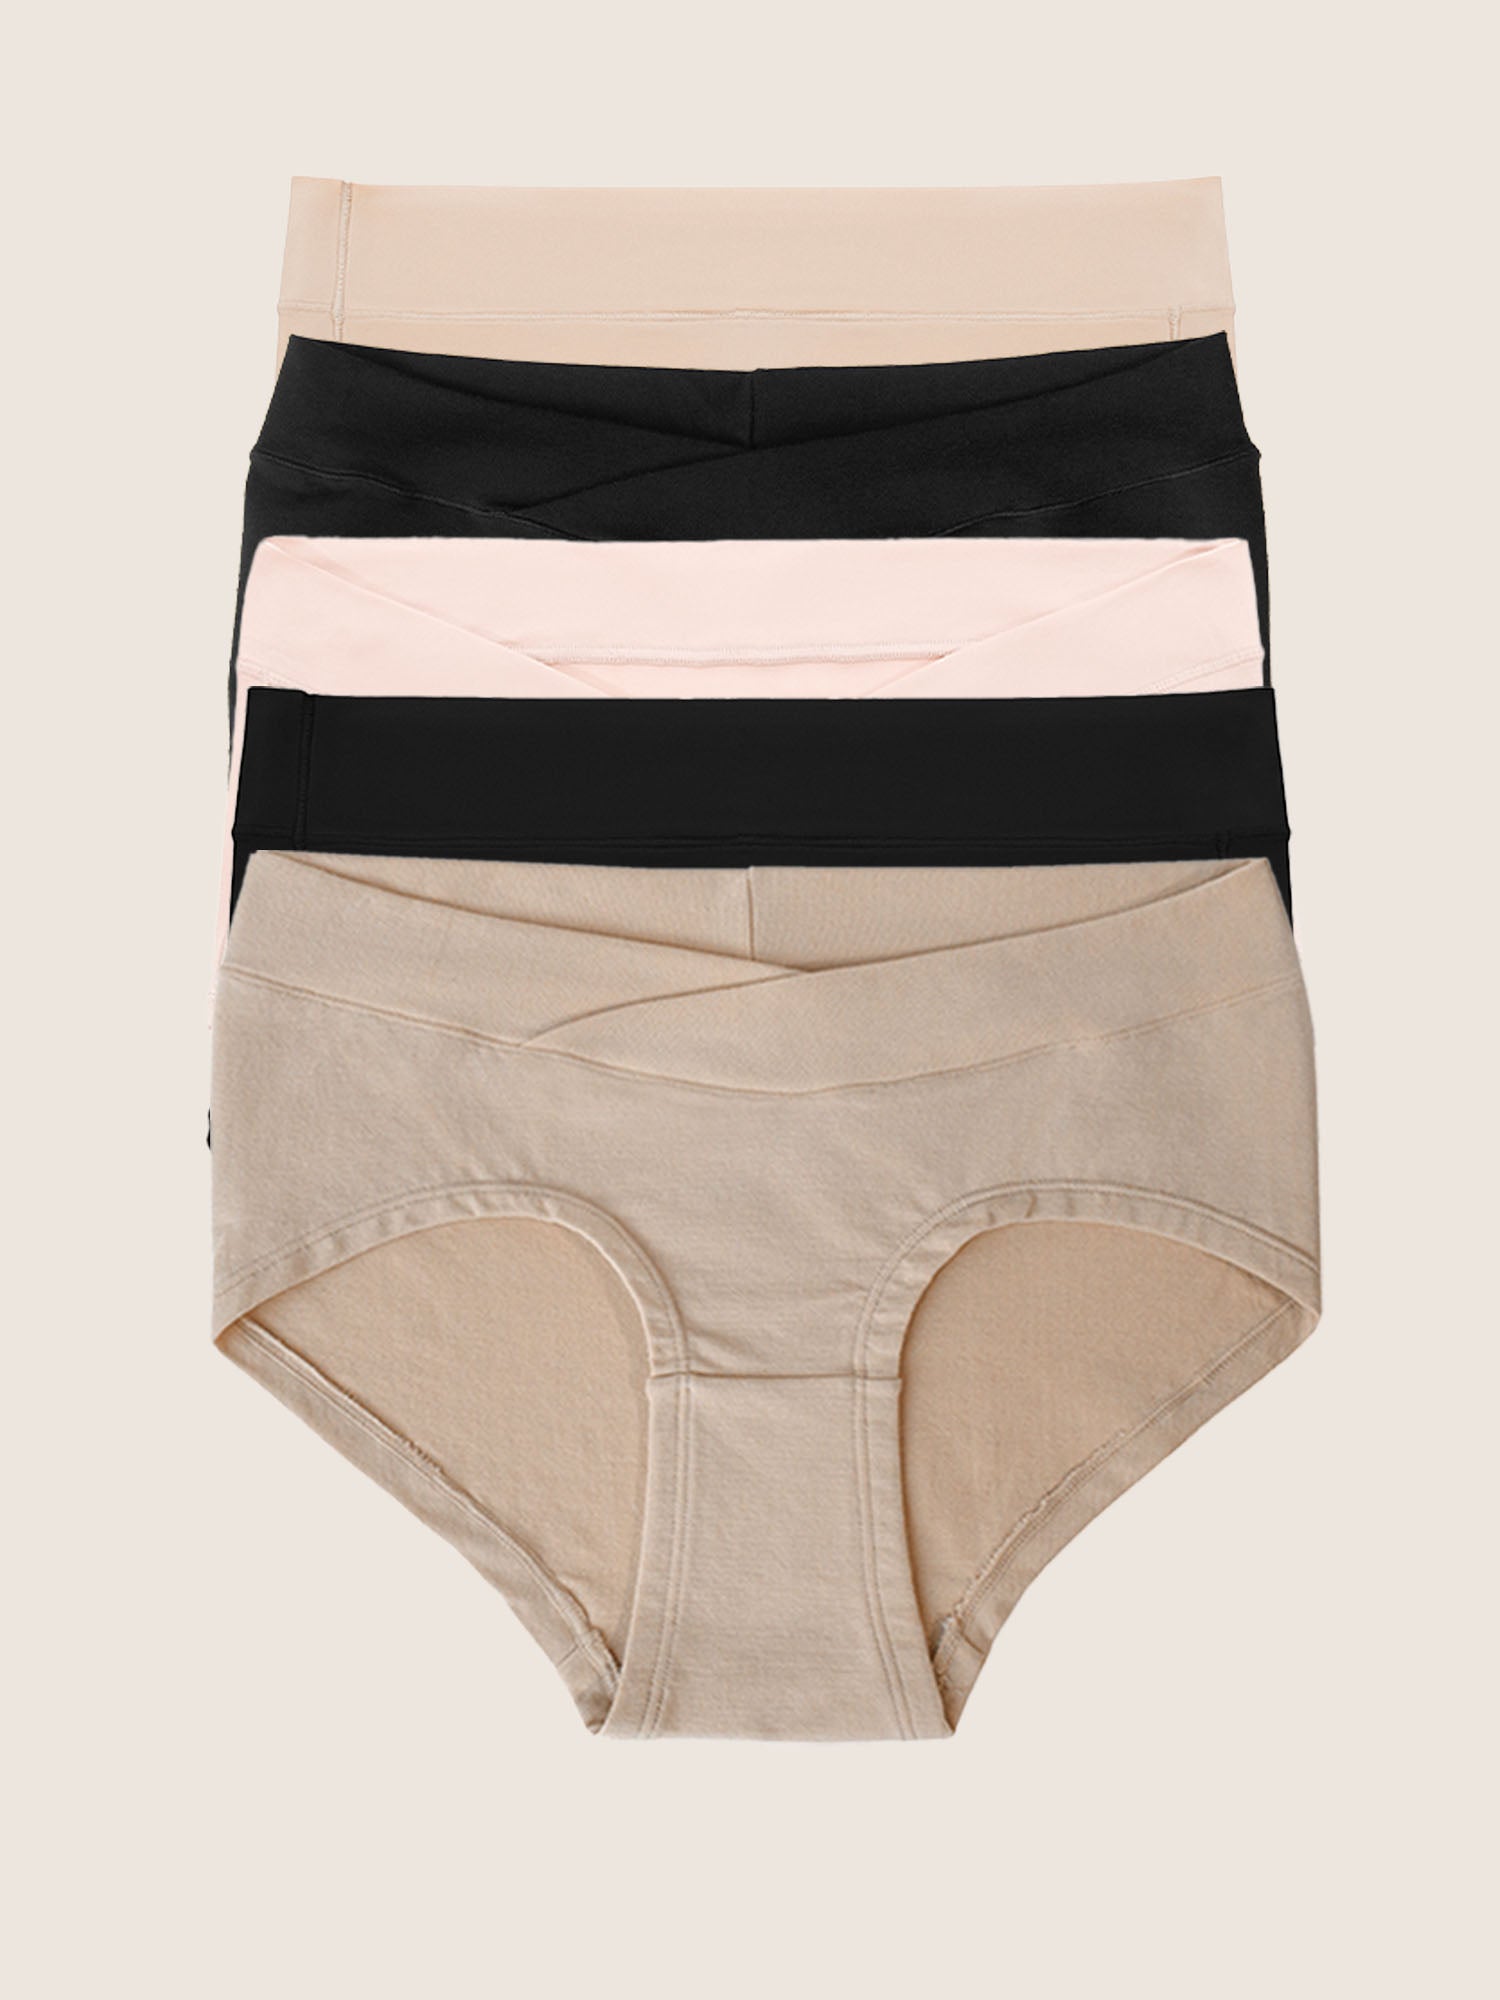 A collection of five hipster style underwears in assorted colors beige, black, soft pink, black, and beige.